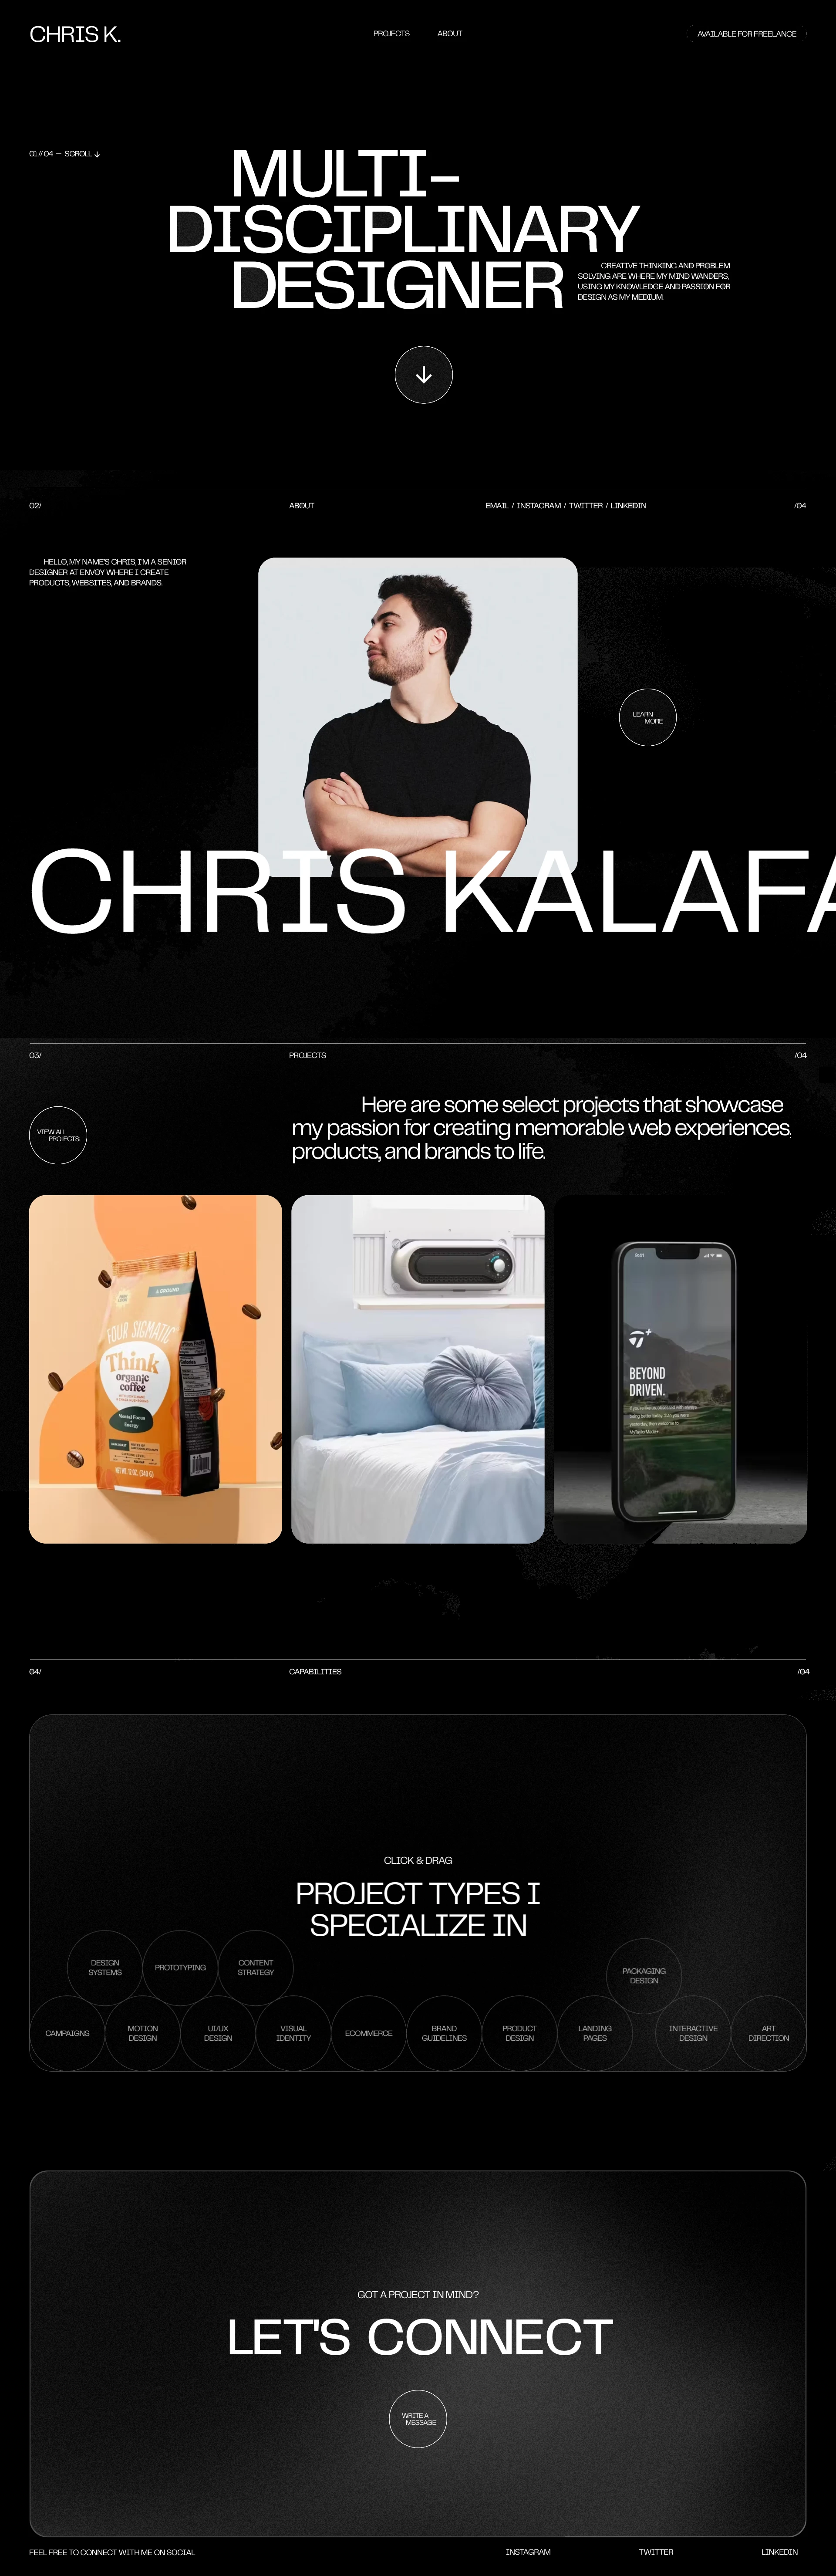 Chris Kalafatis Landing Page Example: Hello, my name’s Chris, I’m a bay-area born designer and art director. Creating connected brands, commerce, product, and web experiences.